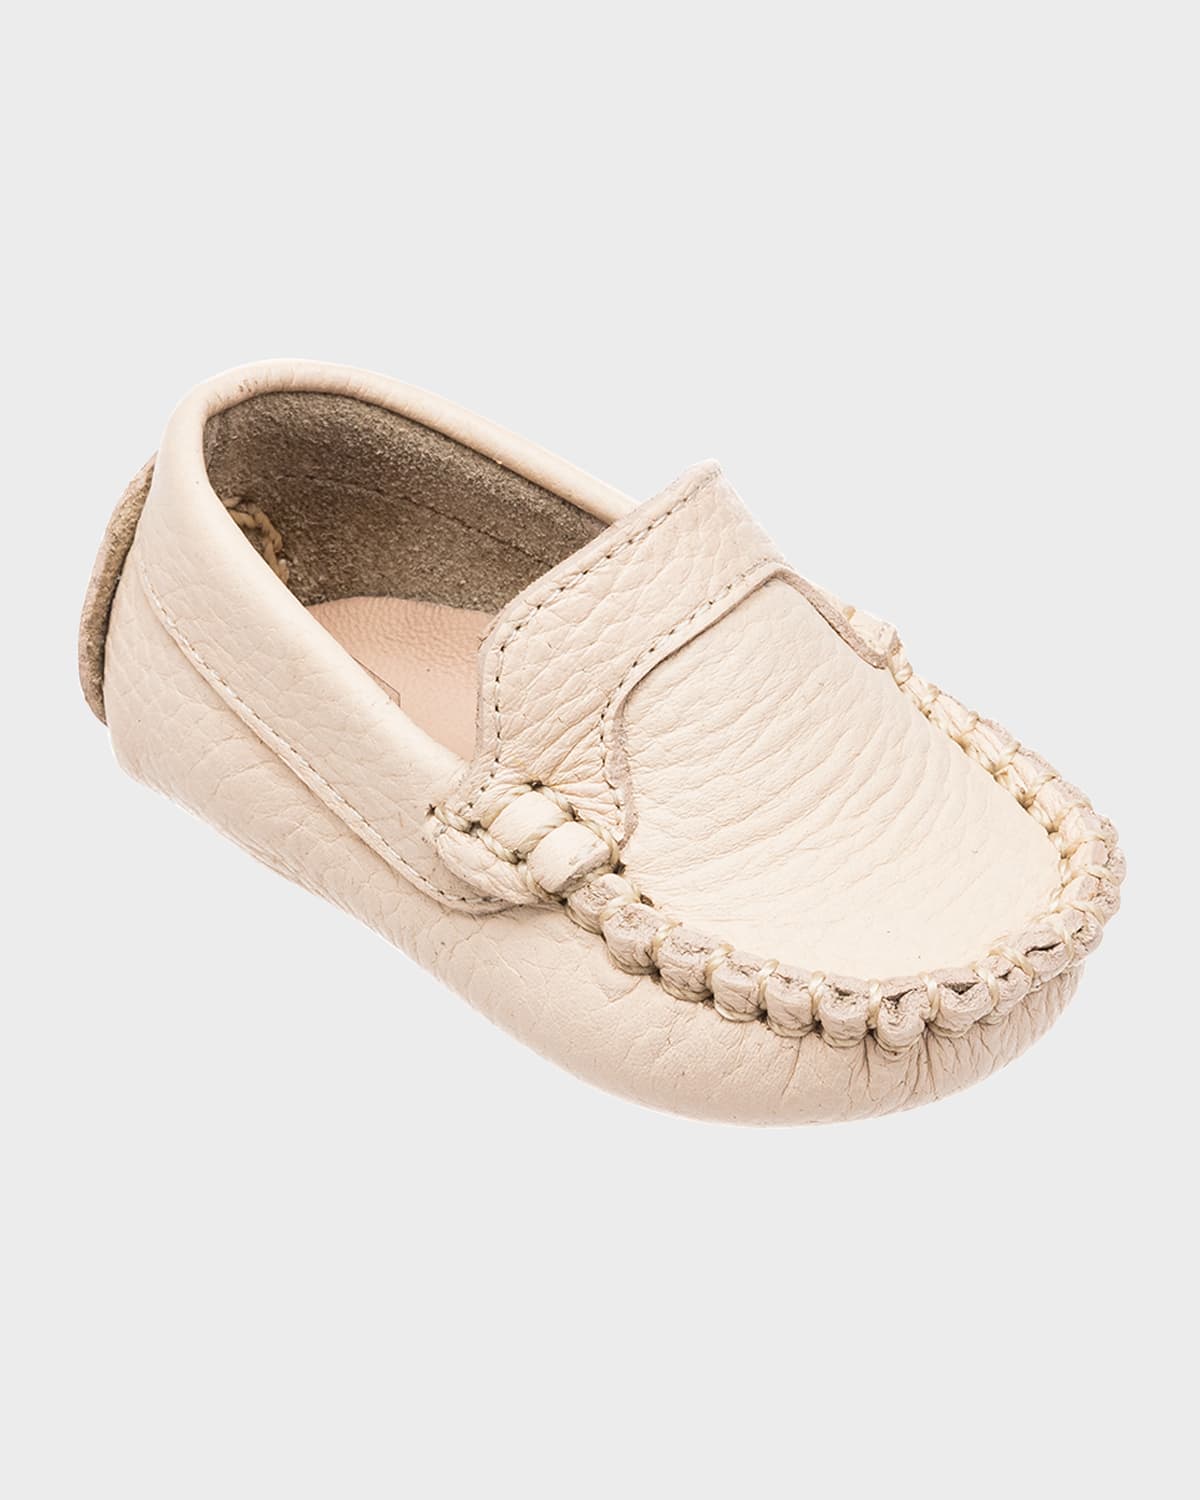 Elephantito Kids' Girl's Leather Moccasin Shoes, Baby In Natural Tan